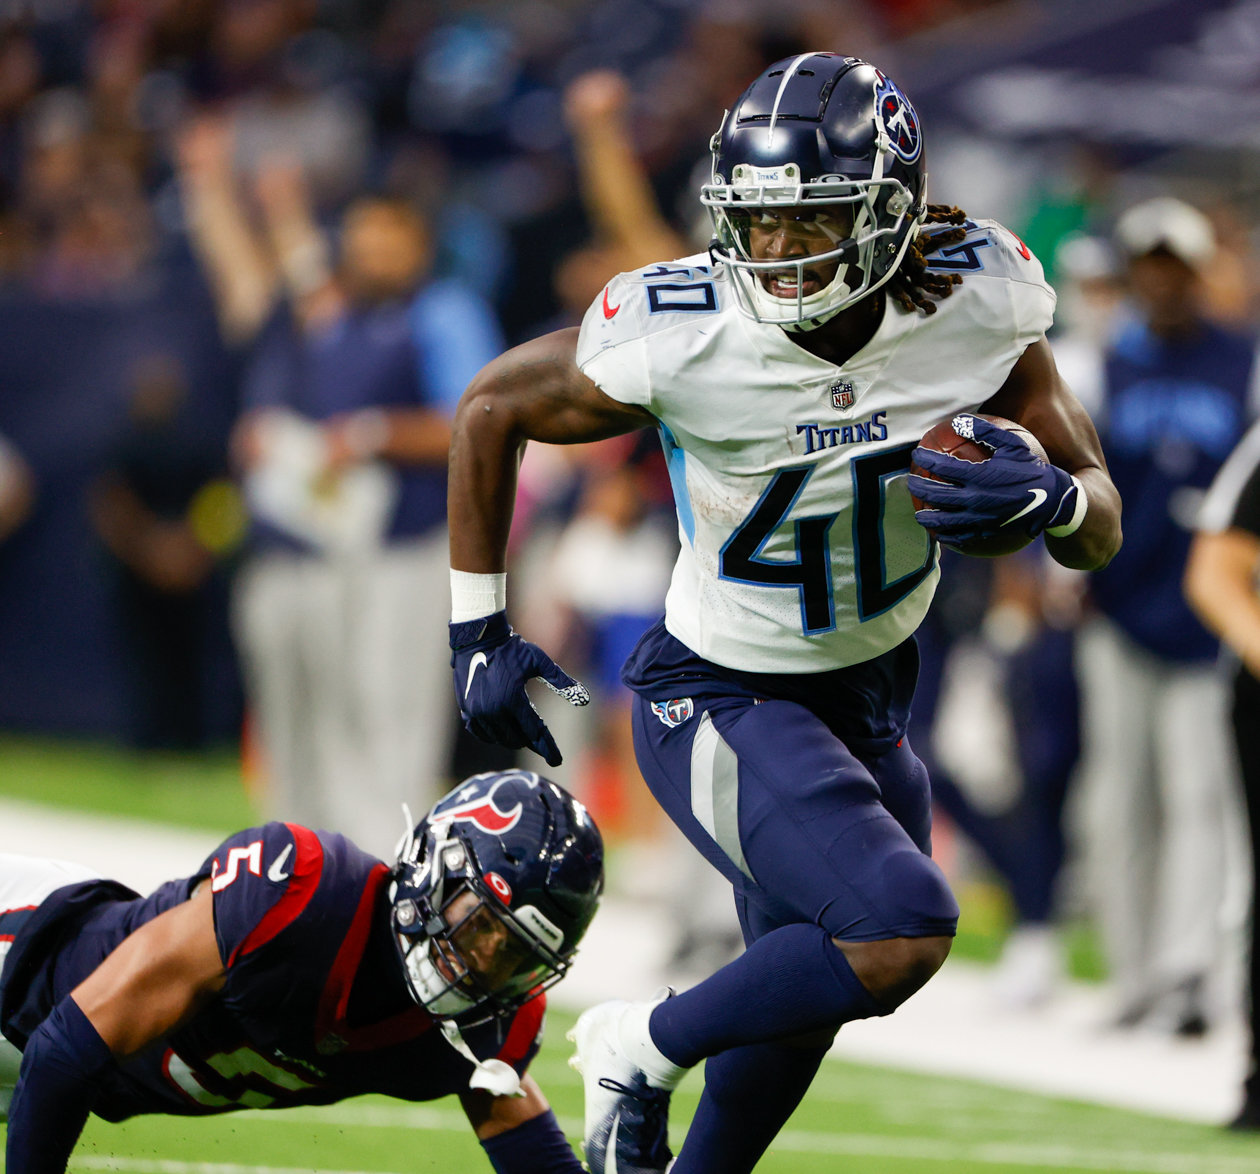 Titans running back Dontrell Hilliard (40) carries the ball during an NFL game between the Texans and the Titans on Oct. 30, 2022 in Houston.